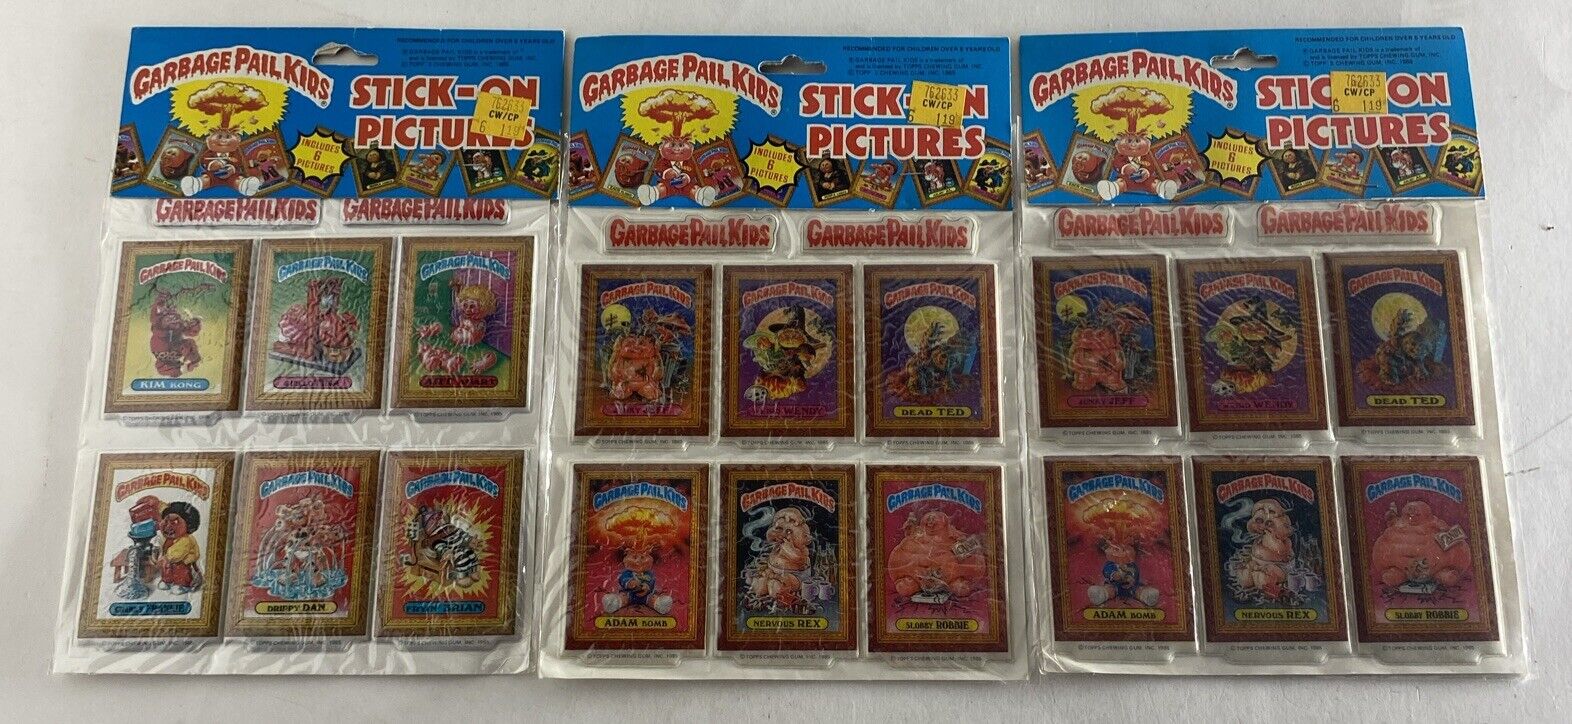 (3) New Vintage 1986 Garbage Pail Kids Stick-On Pictures Puffy Stickers RARE